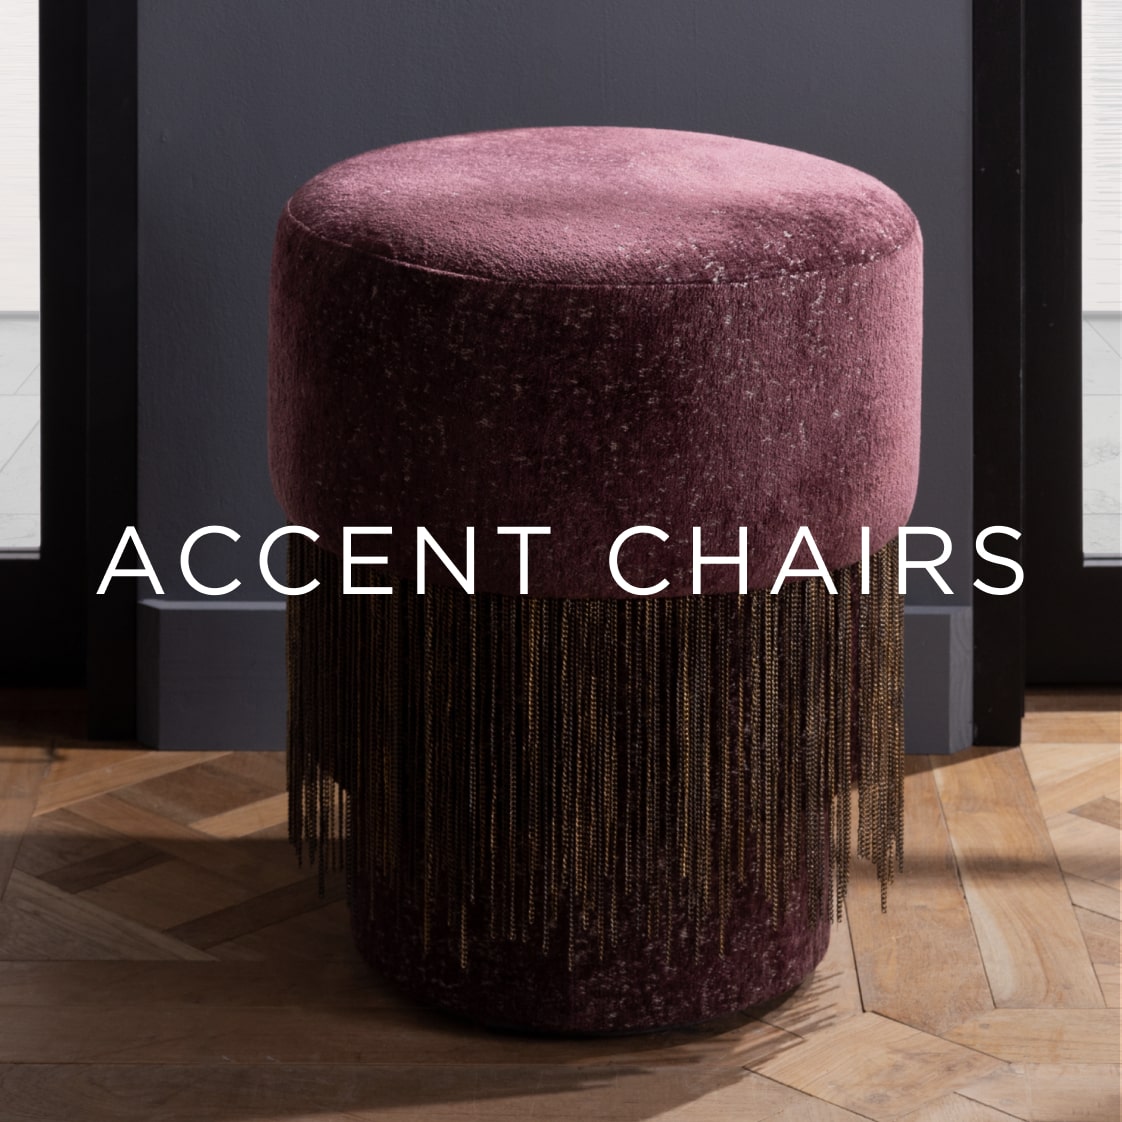 Arteriors accent chairs